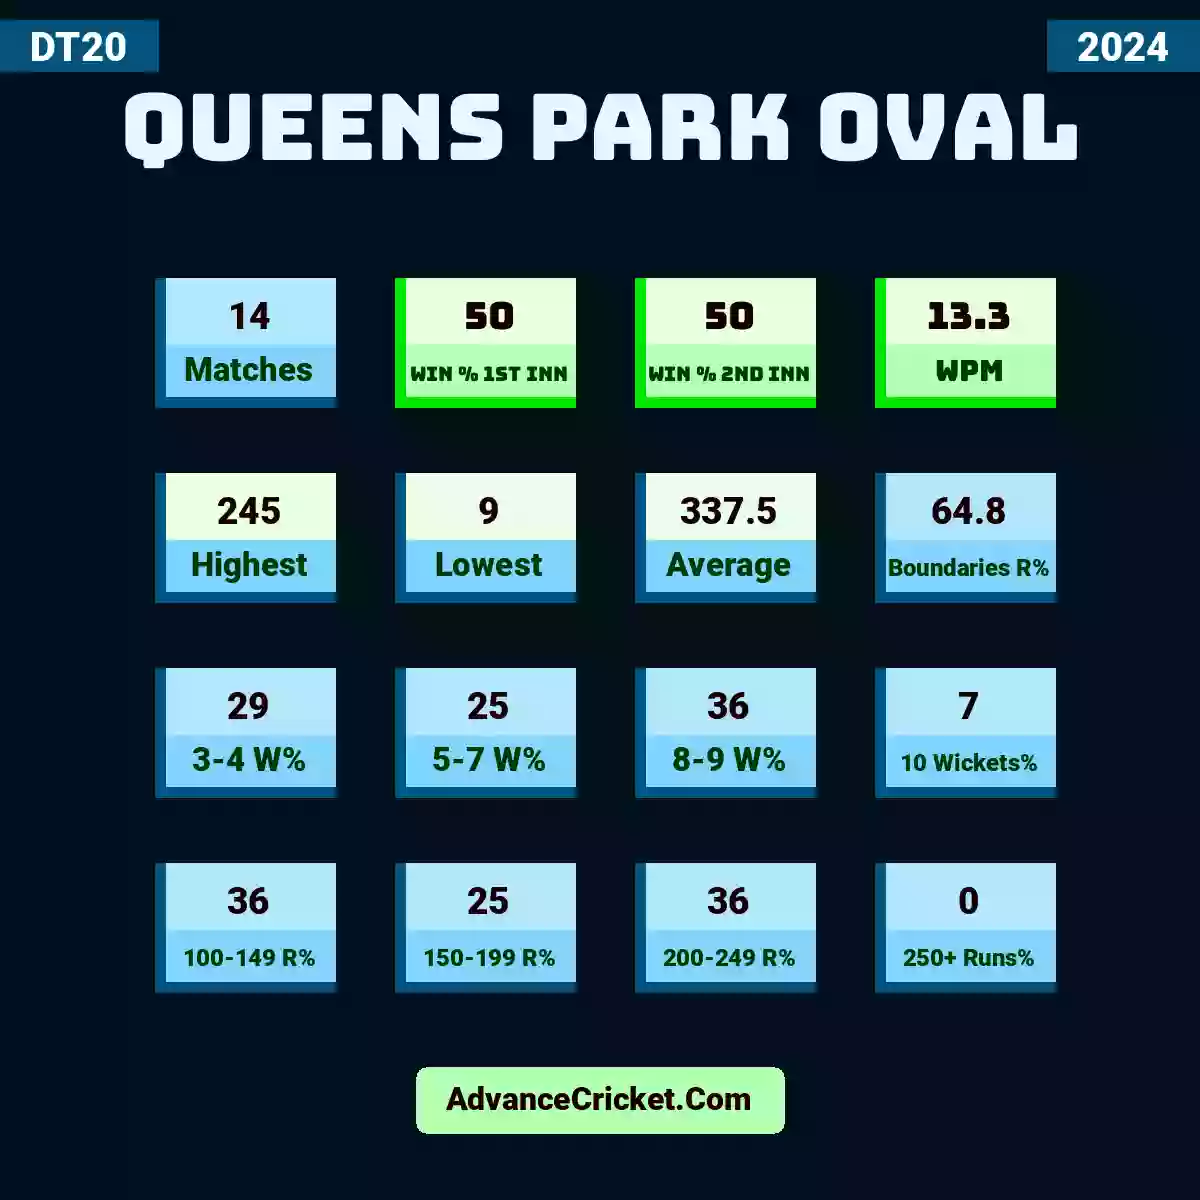 Image showing Queens Park Oval DT20 2024 with Matches: 13, Win % 1st Inn: 46, Win % 2nd Inn: 54, WPM: 13.2, Highest: 245, Lowest: 9, Average: 341.6, Boundaries R%: 65.5, 3-4 W%: 27, 5-7 W%: 27, 8-9 W%: 38, 10 Wickets%: 4, 100-149 R%: 35, 150-199 R%: 23, 200-249 R%: 38, 250+ Runs%: 0.